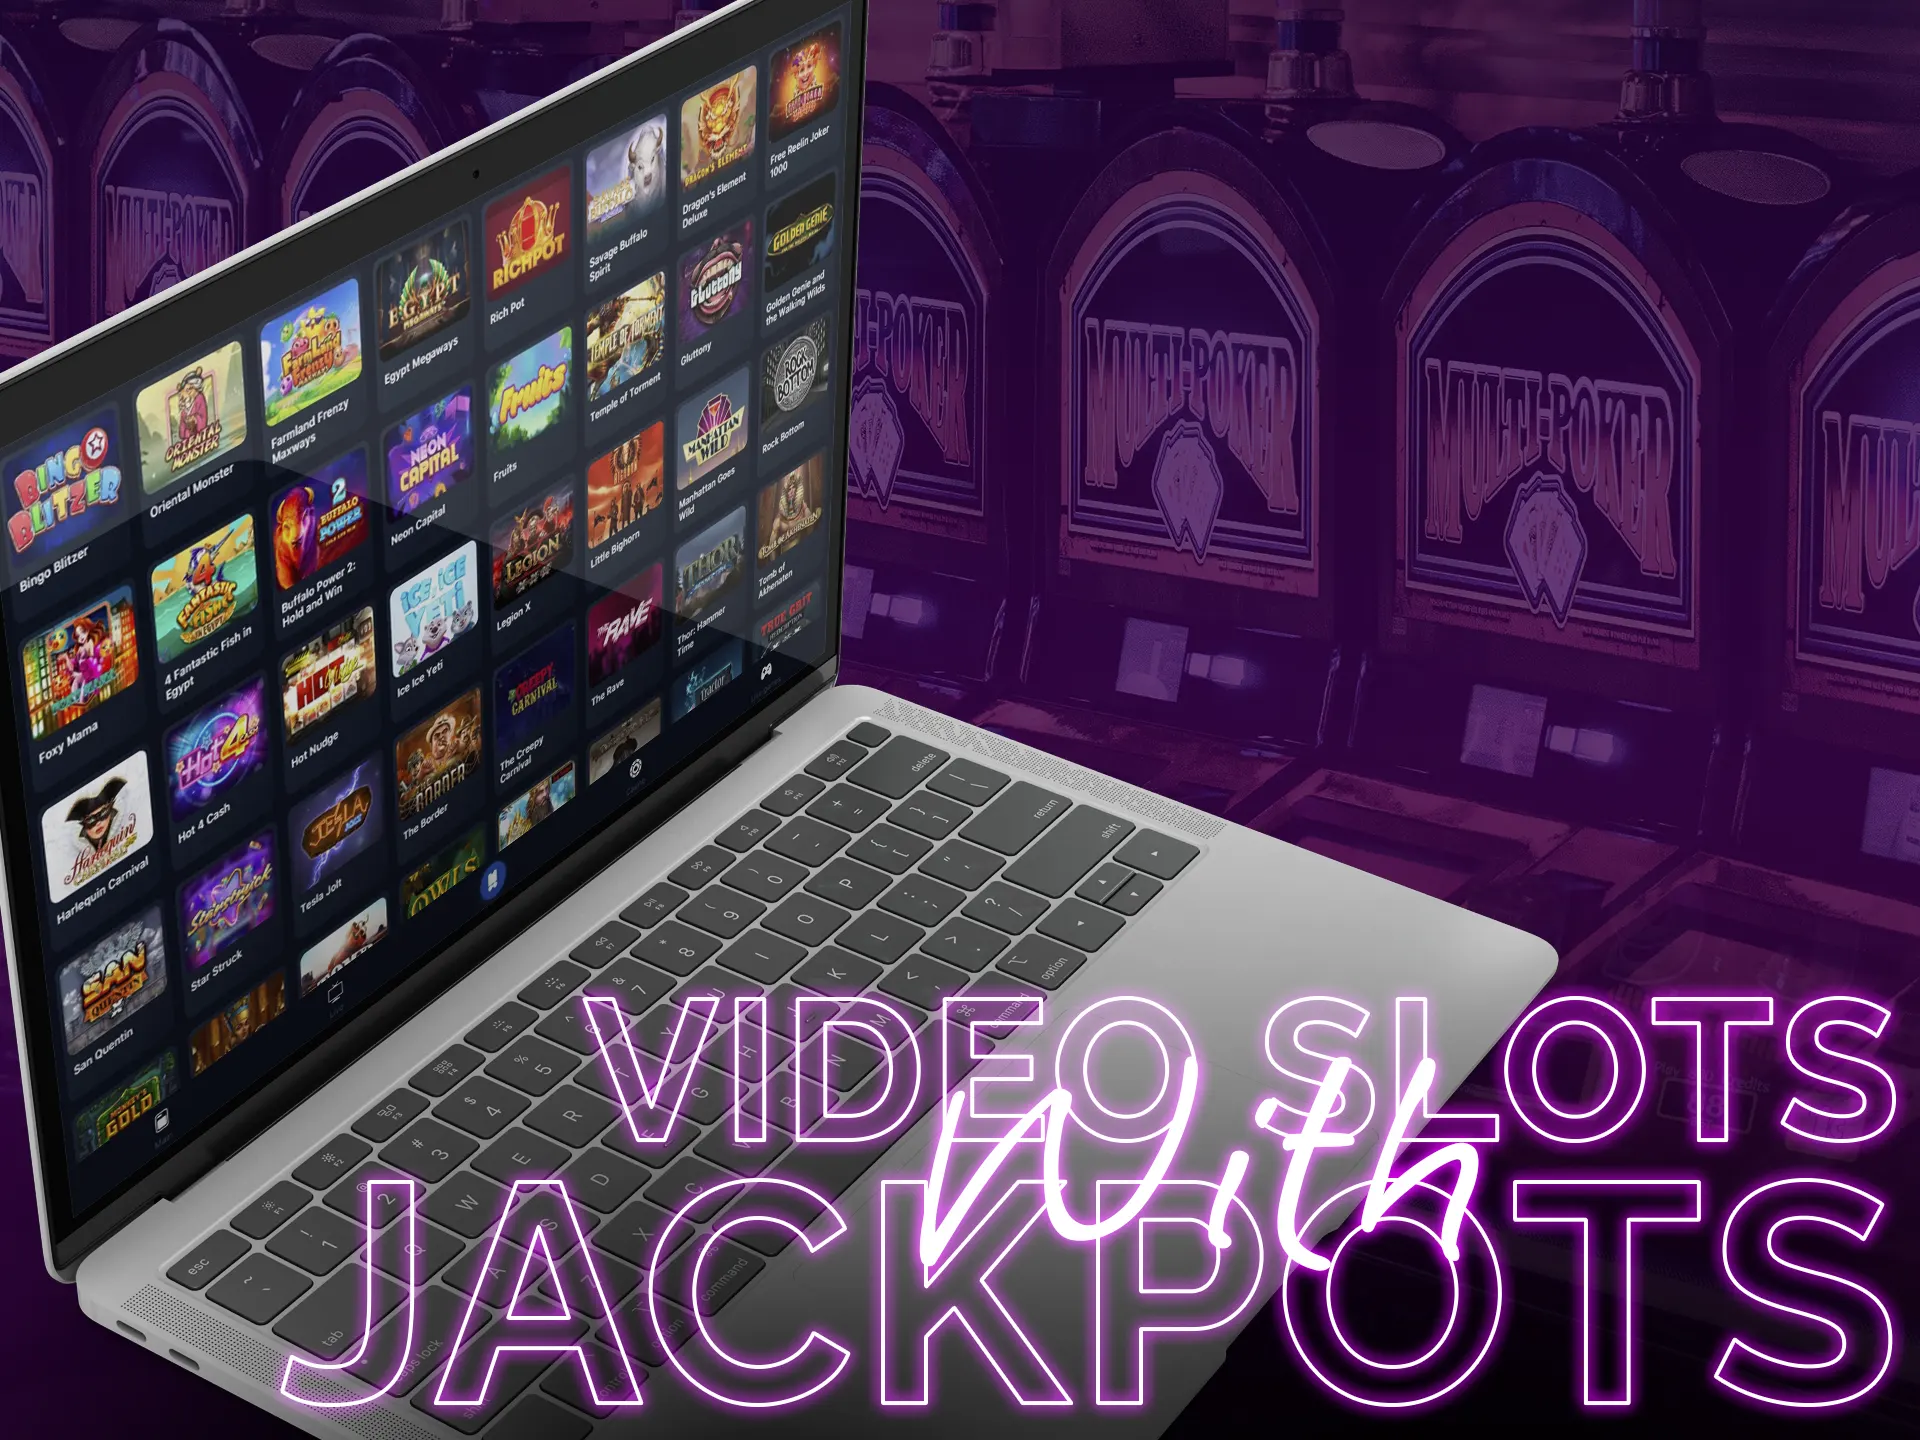 There are many varieties of video slots with jackpots.